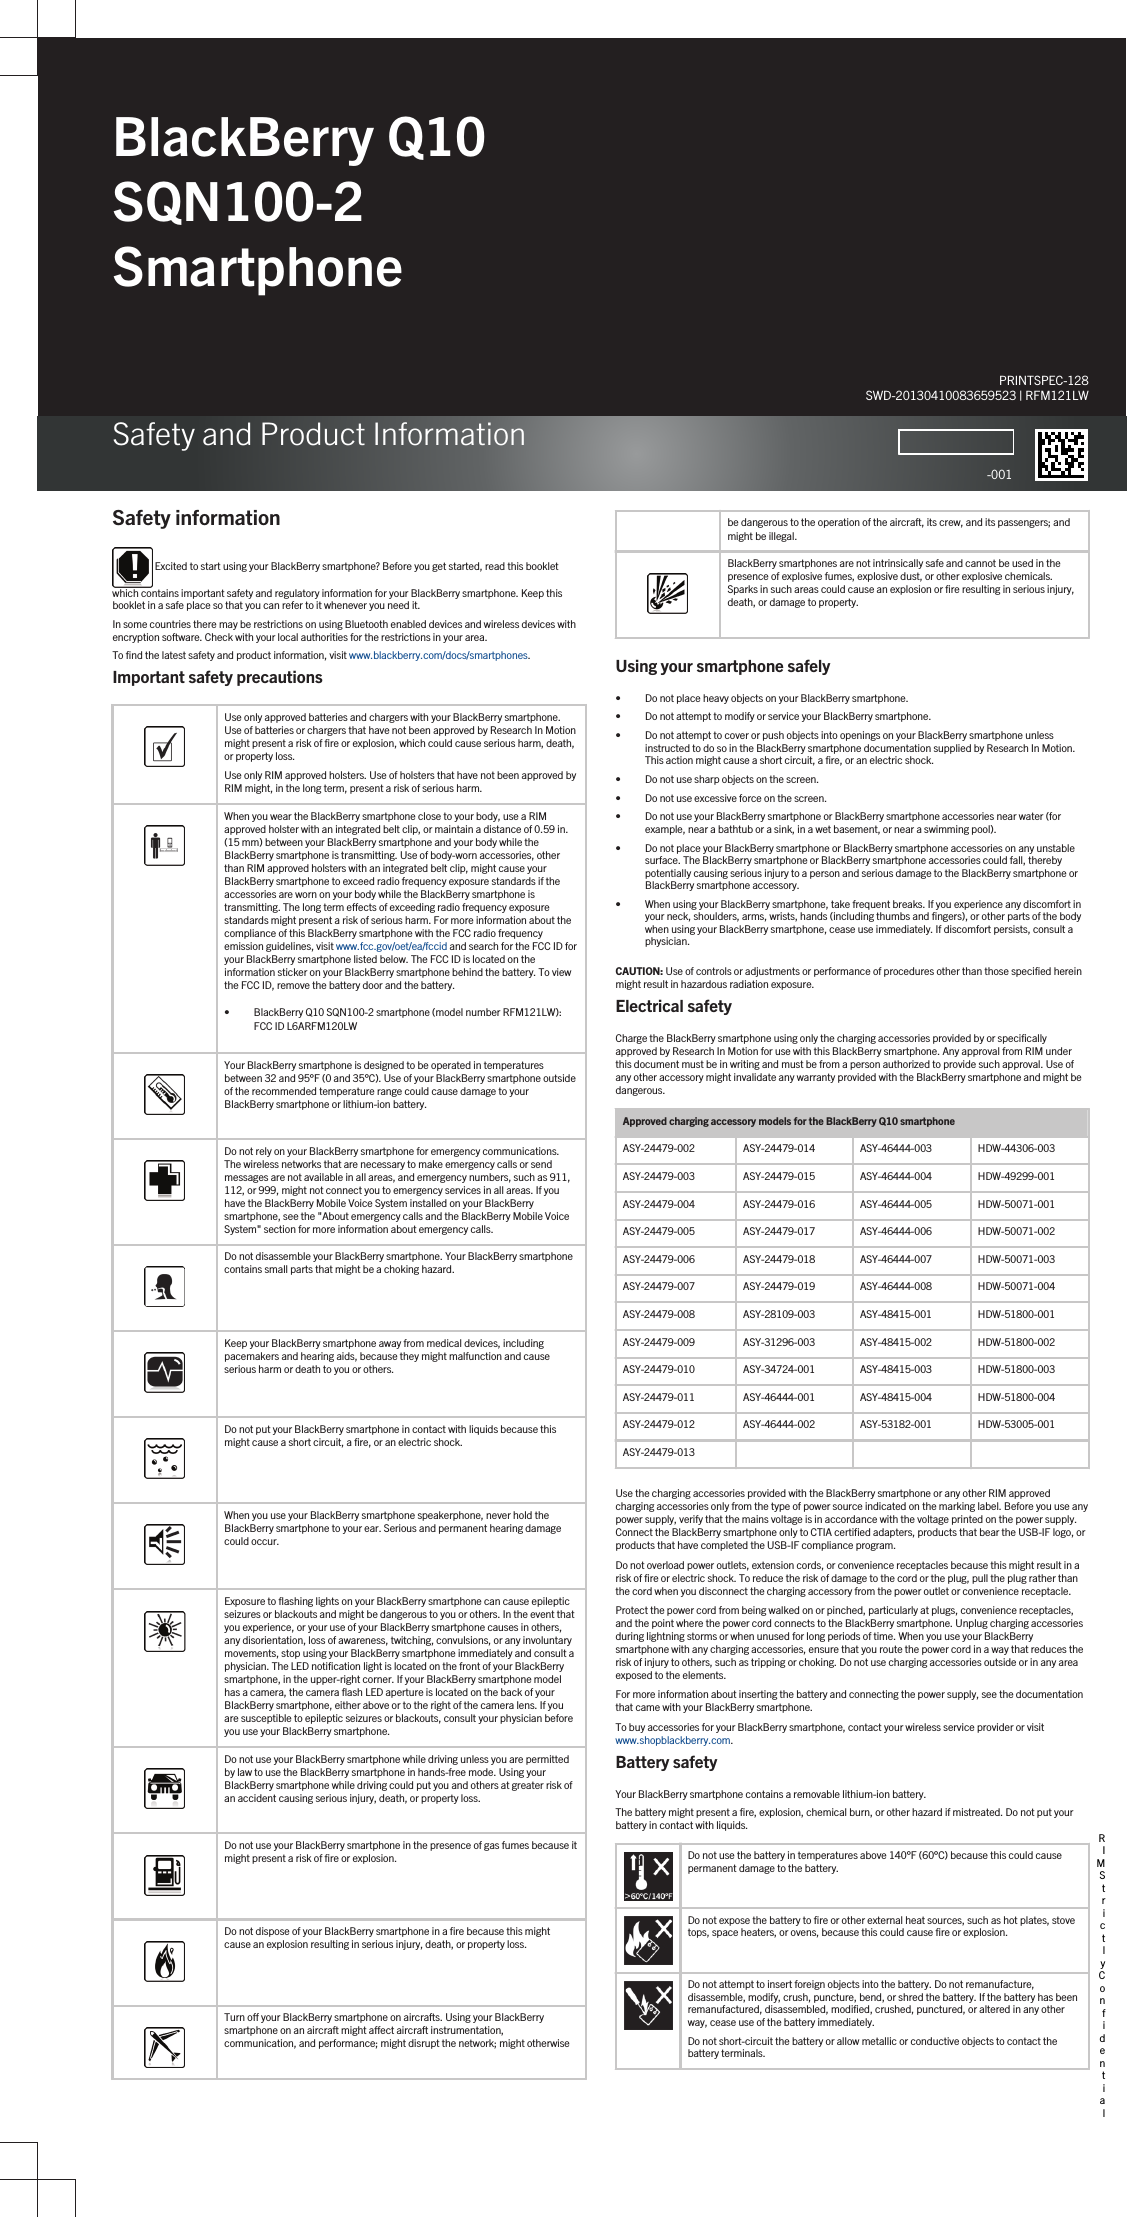 BlackBerry Q10 SQN100-2 SmartphoneSafety and Product InformationPRINTSPEC-128SWD-20130410083659523 | RFM121LW-001Safety information Excited to start using your BlackBerry smartphone? Before you get started, read this booklet which contains important safety and regulatory information for your BlackBerry smartphone. Keep this booklet in a safe place so that you can refer to it whenever you need it.In some countries there may be restrictions on using Bluetooth enabled devices and wireless devices with encryption software. Check with your local authorities for the restrictions in your area.To find the latest safety and product information, visit www.blackberry.com/docs/smartphones.Important safety precautions  Use only approved batteries and chargers with your BlackBerry smartphone. Use of batteries or chargers that have not been approved by Research In Motion might present a risk of fire or explosion, which could cause serious harm, death, or property loss.Use only RIM approved holsters. Use of holsters that have not been approved by RIM might, in the long term, present a risk of serious harm.  When you wear the BlackBerry smartphone close to your body, use a RIM approved holster with an integrated belt clip, or maintain a distance of 0.59 in. (15 mm) between your BlackBerry smartphone and your body while the BlackBerry smartphone is transmitting. Use of body-worn accessories, other than RIM approved holsters with an integrated belt clip, might cause your BlackBerry smartphone to exceed radio frequency exposure standards if the accessories are worn on your body while the BlackBerry smartphone is transmitting. The long term effects of exceeding radio frequency exposure standards might present a risk of serious harm. For more information about the compliance of this BlackBerry smartphone with the FCC radio frequency emission guidelines, visit www.fcc.gov/oet/ea/fccid and search for the FCC ID for your BlackBerry smartphone listed below. The FCC ID is located on the information sticker on your BlackBerry smartphone behind the battery. To view the FCC ID, remove the battery door and the battery.• BlackBerry Q10 SQN100-2 smartphone (model number RFM121LW): FCC ID L6ARFM120LW  Your BlackBerry smartphone is designed to be operated in temperatures between 32 and 95°F (0 and 35°C). Use of your BlackBerry smartphone outside of the recommended temperature range could cause damage to your BlackBerry smartphone or lithium-ion battery.  Do not rely on your BlackBerry smartphone for emergency communications. The wireless networks that are necessary to make emergency calls or send messages are not available in all areas, and emergency numbers, such as 911, 112, or 999, might not connect you to emergency services in all areas. If you have the BlackBerry Mobile Voice System installed on your BlackBerry smartphone, see the &quot;About emergency calls and the BlackBerry Mobile Voice System&quot; section for more information about emergency calls.  Do not disassemble your BlackBerry smartphone. Your BlackBerry smartphone contains small parts that might be a choking hazard.  Keep your BlackBerry smartphone away from medical devices, including pacemakers and hearing aids, because they might malfunction and cause serious harm or death to you or others.  Do not put your BlackBerry smartphone in contact with liquids because this might cause a short circuit, a fire, or an electric shock.  When you use your BlackBerry smartphone speakerphone, never hold the BlackBerry smartphone to your ear. Serious and permanent hearing damage could occur.  Exposure to flashing lights on your BlackBerry smartphone can cause epileptic seizures or blackouts and might be dangerous to you or others. In the event that you experience, or your use of your BlackBerry smartphone causes in others, any disorientation, loss of awareness, twitching, convulsions, or any involuntary movements, stop using your BlackBerry smartphone immediately and consult a physician. The LED notification light is located on the front of your BlackBerry smartphone, in the upper-right corner. If your BlackBerry smartphone model has a camera, the camera flash LED aperture is located on the back of your BlackBerry smartphone, either above or to the right of the camera lens. If you are susceptible to epileptic seizures or blackouts, consult your physician before you use your BlackBerry smartphone.  Do not use your BlackBerry smartphone while driving unless you are permitted by law to use the BlackBerry smartphone in hands-free mode. Using your BlackBerry smartphone while driving could put you and others at greater risk of an accident causing serious injury, death, or property loss.  Do not use your BlackBerry smartphone in the presence of gas fumes because it might present a risk of fire or explosion.  Do not dispose of your BlackBerry smartphone in a fire because this might cause an explosion resulting in serious injury, death, or property loss.  Turn off your BlackBerry smartphone on aircrafts. Using your BlackBerry smartphone on an aircraft might affect aircraft instrumentation, communication, and performance; might disrupt the network; might otherwise   be dangerous to the operation of the aircraft, its crew, and its passengers; and might be illegal.  BlackBerry smartphones are not intrinsically safe and cannot be used in the presence of explosive fumes, explosive dust, or other explosive chemicals. Sparks in such areas could cause an explosion or fire resulting in serious injury, death, or damage to property.Using your smartphone safely• Do not place heavy objects on your BlackBerry smartphone.• Do not attempt to modify or service your BlackBerry smartphone.• Do not attempt to cover or push objects into openings on your BlackBerry smartphone unless instructed to do so in the BlackBerry smartphone documentation supplied by Research In Motion. This action might cause a short circuit, a fire, or an electric shock.• Do not use sharp objects on the screen.• Do not use excessive force on the screen.• Do not use your BlackBerry smartphone or BlackBerry smartphone accessories near water (for example, near a bathtub or a sink, in a wet basement, or near a swimming pool).• Do not place your BlackBerry smartphone or BlackBerry smartphone accessories on any unstable surface. The BlackBerry smartphone or BlackBerry smartphone accessories could fall, thereby potentially causing serious injury to a person and serious damage to the BlackBerry smartphone or BlackBerry smartphone accessory.• When using your BlackBerry smartphone, take frequent breaks. If you experience any discomfort in your neck, shoulders, arms, wrists, hands (including thumbs and fingers), or other parts of the body when using your BlackBerry smartphone, cease use immediately. If discomfort persists, consult a physician.CAUTION: Use of controls or adjustments or performance of procedures other than those specified herein might result in hazardous radiation exposure.Electrical safetyCharge the BlackBerry smartphone using only the charging accessories provided by or specifically approved by Research In Motion for use with this BlackBerry smartphone. Any approval from RIM under this document must be in writing and must be from a person authorized to provide such approval. Use of any other accessory might invalidate any warranty provided with the BlackBerry smartphone and might be dangerous.Approved charging accessory models for the BlackBerry Q10 smartphoneASY-24479-002 ASY-24479-014 ASY-46444-003 HDW-44306-003ASY-24479-003 ASY-24479-015 ASY-46444-004 HDW-49299-001ASY-24479-004 ASY-24479-016 ASY-46444-005 HDW-50071-001ASY-24479-005 ASY-24479-017 ASY-46444-006 HDW-50071-002ASY-24479-006 ASY-24479-018 ASY-46444-007 HDW-50071-003ASY-24479-007 ASY-24479-019 ASY-46444-008 HDW-50071-004ASY-24479-008 ASY-28109-003 ASY-48415-001 HDW-51800-001ASY-24479-009 ASY-31296-003 ASY-48415-002 HDW-51800-002ASY-24479-010 ASY-34724-001 ASY-48415-003 HDW-51800-003ASY-24479-011 ASY-46444-001 ASY-48415-004 HDW-51800-004ASY-24479-012 ASY-46444-002 ASY-53182-001 HDW-53005-001ASY-24479-013Use the charging accessories provided with the BlackBerry smartphone or any other RIM approved charging accessories only from the type of power source indicated on the marking label. Before you use any power supply, verify that the mains voltage is in accordance with the voltage printed on the power supply. Connect the BlackBerry smartphone only to CTIA certified adapters, products that bear the USB-IF logo, or products that have completed the USB-IF compliance program.Do not overload power outlets, extension cords, or convenience receptacles because this might result in a risk of fire or electric shock. To reduce the risk of damage to the cord or the plug, pull the plug rather than the cord when you disconnect the charging accessory from the power outlet or convenience receptacle.Protect the power cord from being walked on or pinched, particularly at plugs, convenience receptacles, and the point where the power cord connects to the BlackBerry smartphone. Unplug charging accessories during lightning storms or when unused for long periods of time. When you use your BlackBerry smartphone with any charging accessories, ensure that you route the power cord in a way that reduces the risk of injury to others, such as tripping or choking. Do not use charging accessories outside or in any area exposed to the elements.For more information about inserting the battery and connecting the power supply, see the documentation that came with your BlackBerry smartphone.To buy accessories for your BlackBerry smartphone, contact your wireless service provider or visit www.shopblackberry.com.Battery safetyYour BlackBerry smartphone contains a removable lithium-ion battery.The battery might present a fire, explosion, chemical burn, or other hazard if mistreated. Do not put your battery in contact with liquids.Do not use the battery in temperatures above 140°F (60°C) because this could cause permanent damage to the battery.Do not expose the battery to fire or other external heat sources, such as hot plates, stove tops, space heaters, or ovens, because this could cause fire or explosion.Do not attempt to insert foreign objects into the battery. Do not remanufacture, disassemble, modify, crush, puncture, bend, or shred the battery. If the battery has been remanufactured, disassembled, modified, crushed, punctured, or altered in any other way, cease use of the battery immediately.Do not short-circuit the battery or allow metallic or conductive objects to contact the battery terminals.RIM Strictly Confidential